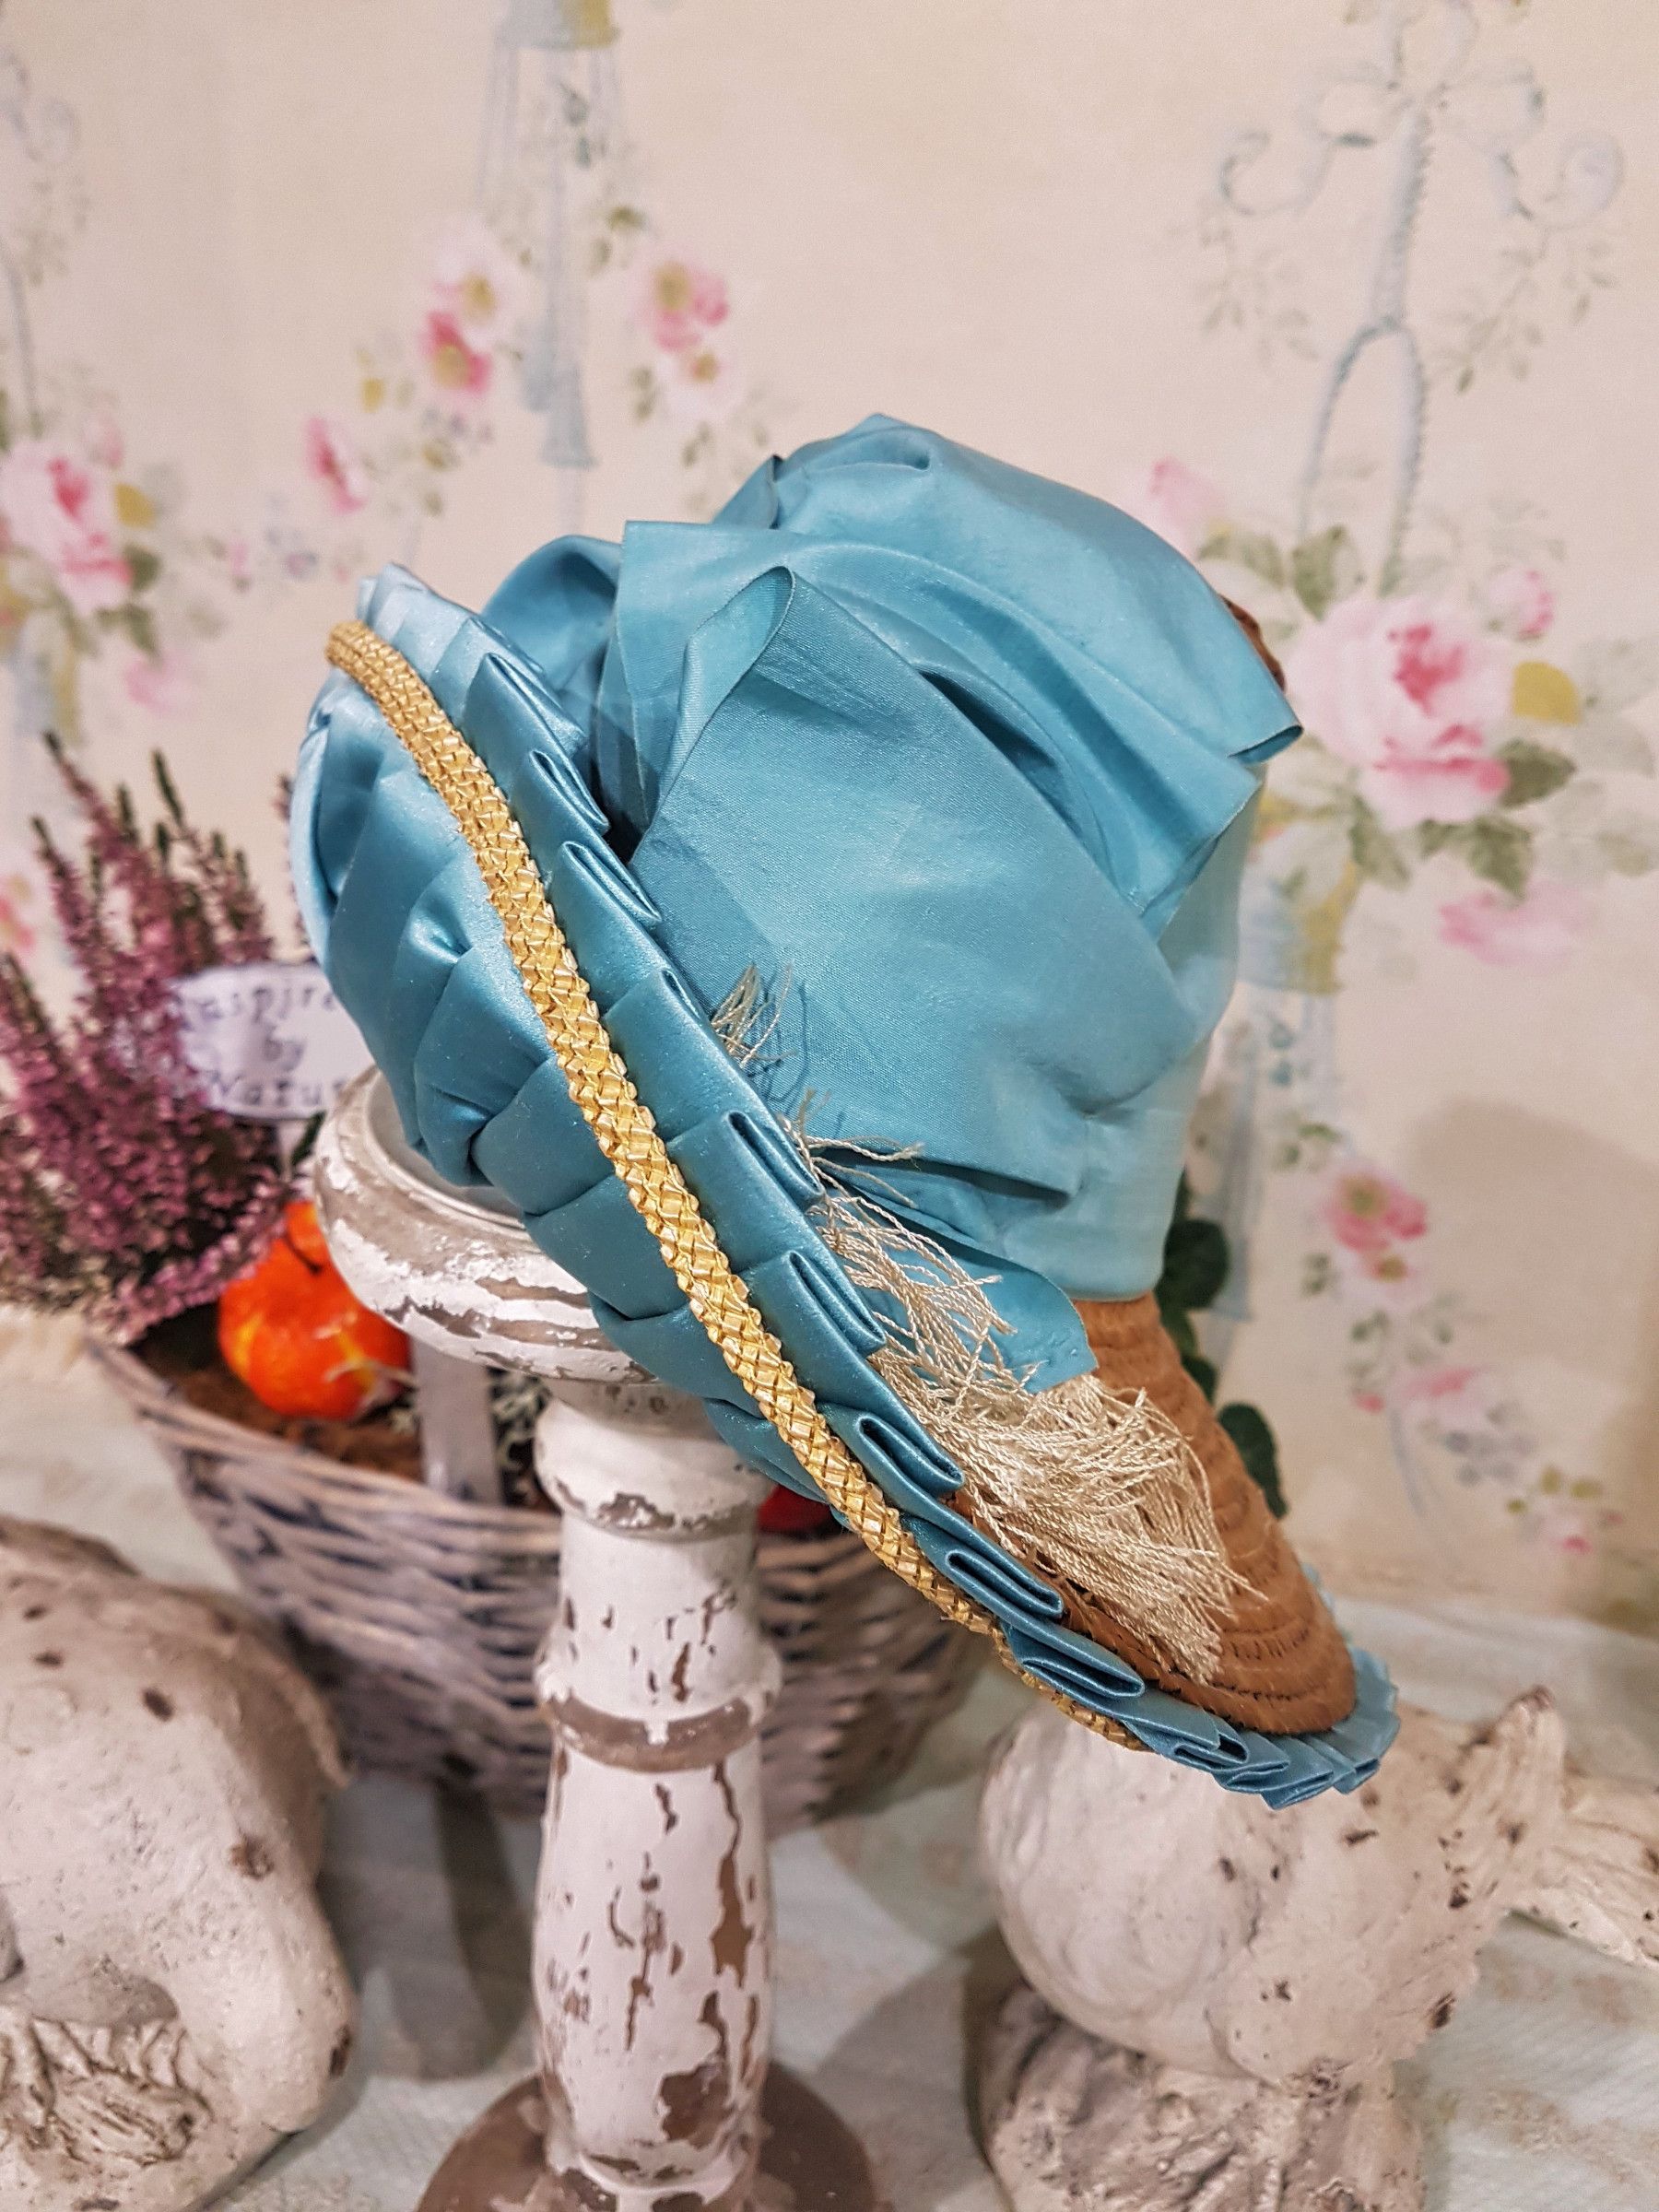 Stunning French Blue Silk Costume with Antique Straw Bonnet